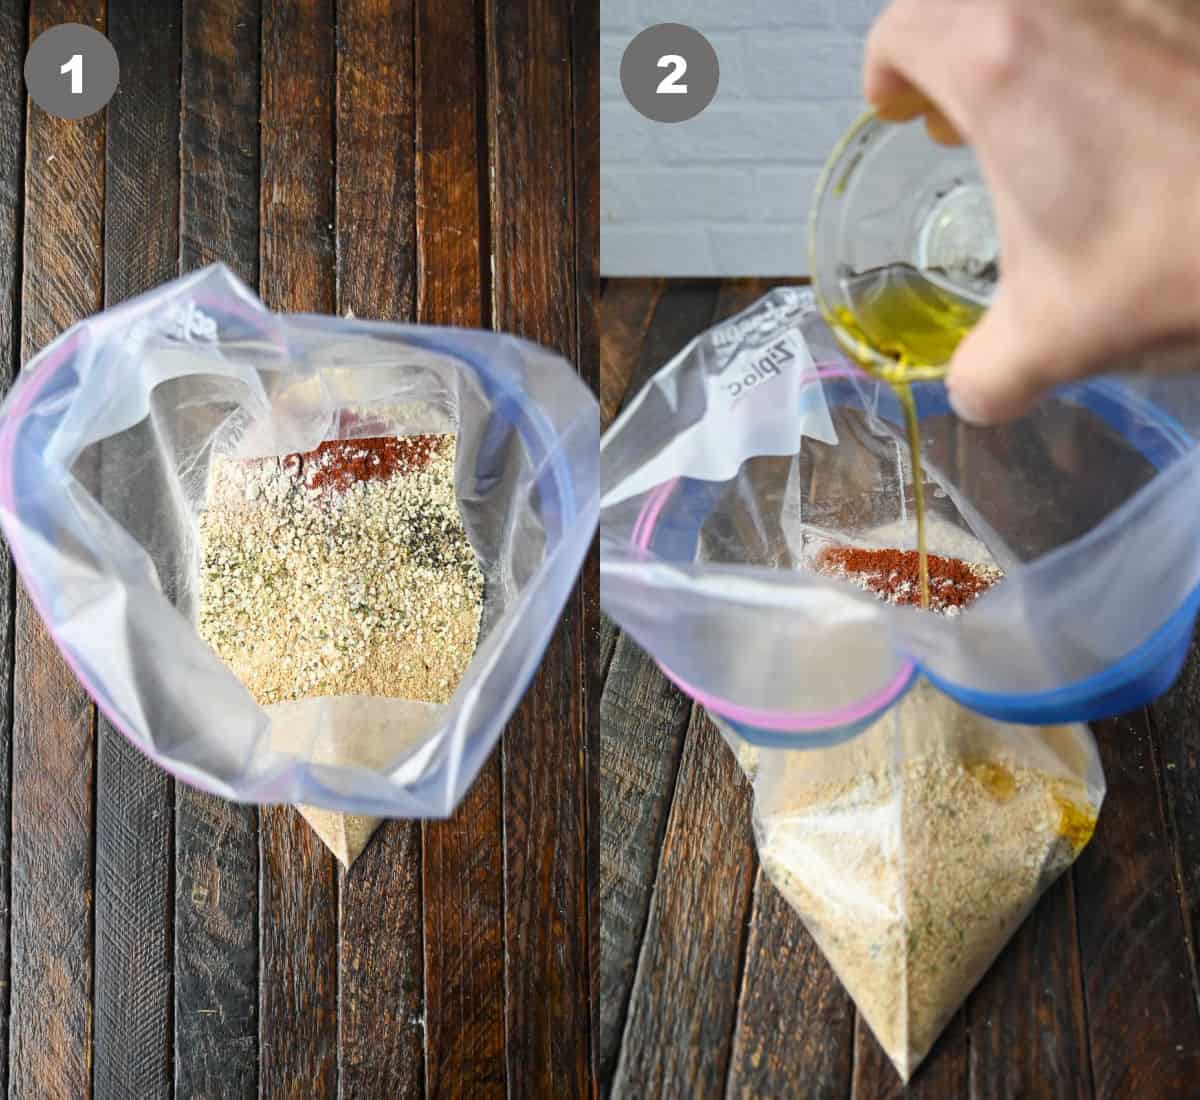 Shake and bake seasonings being put into a large ziplock bag, then oil added.